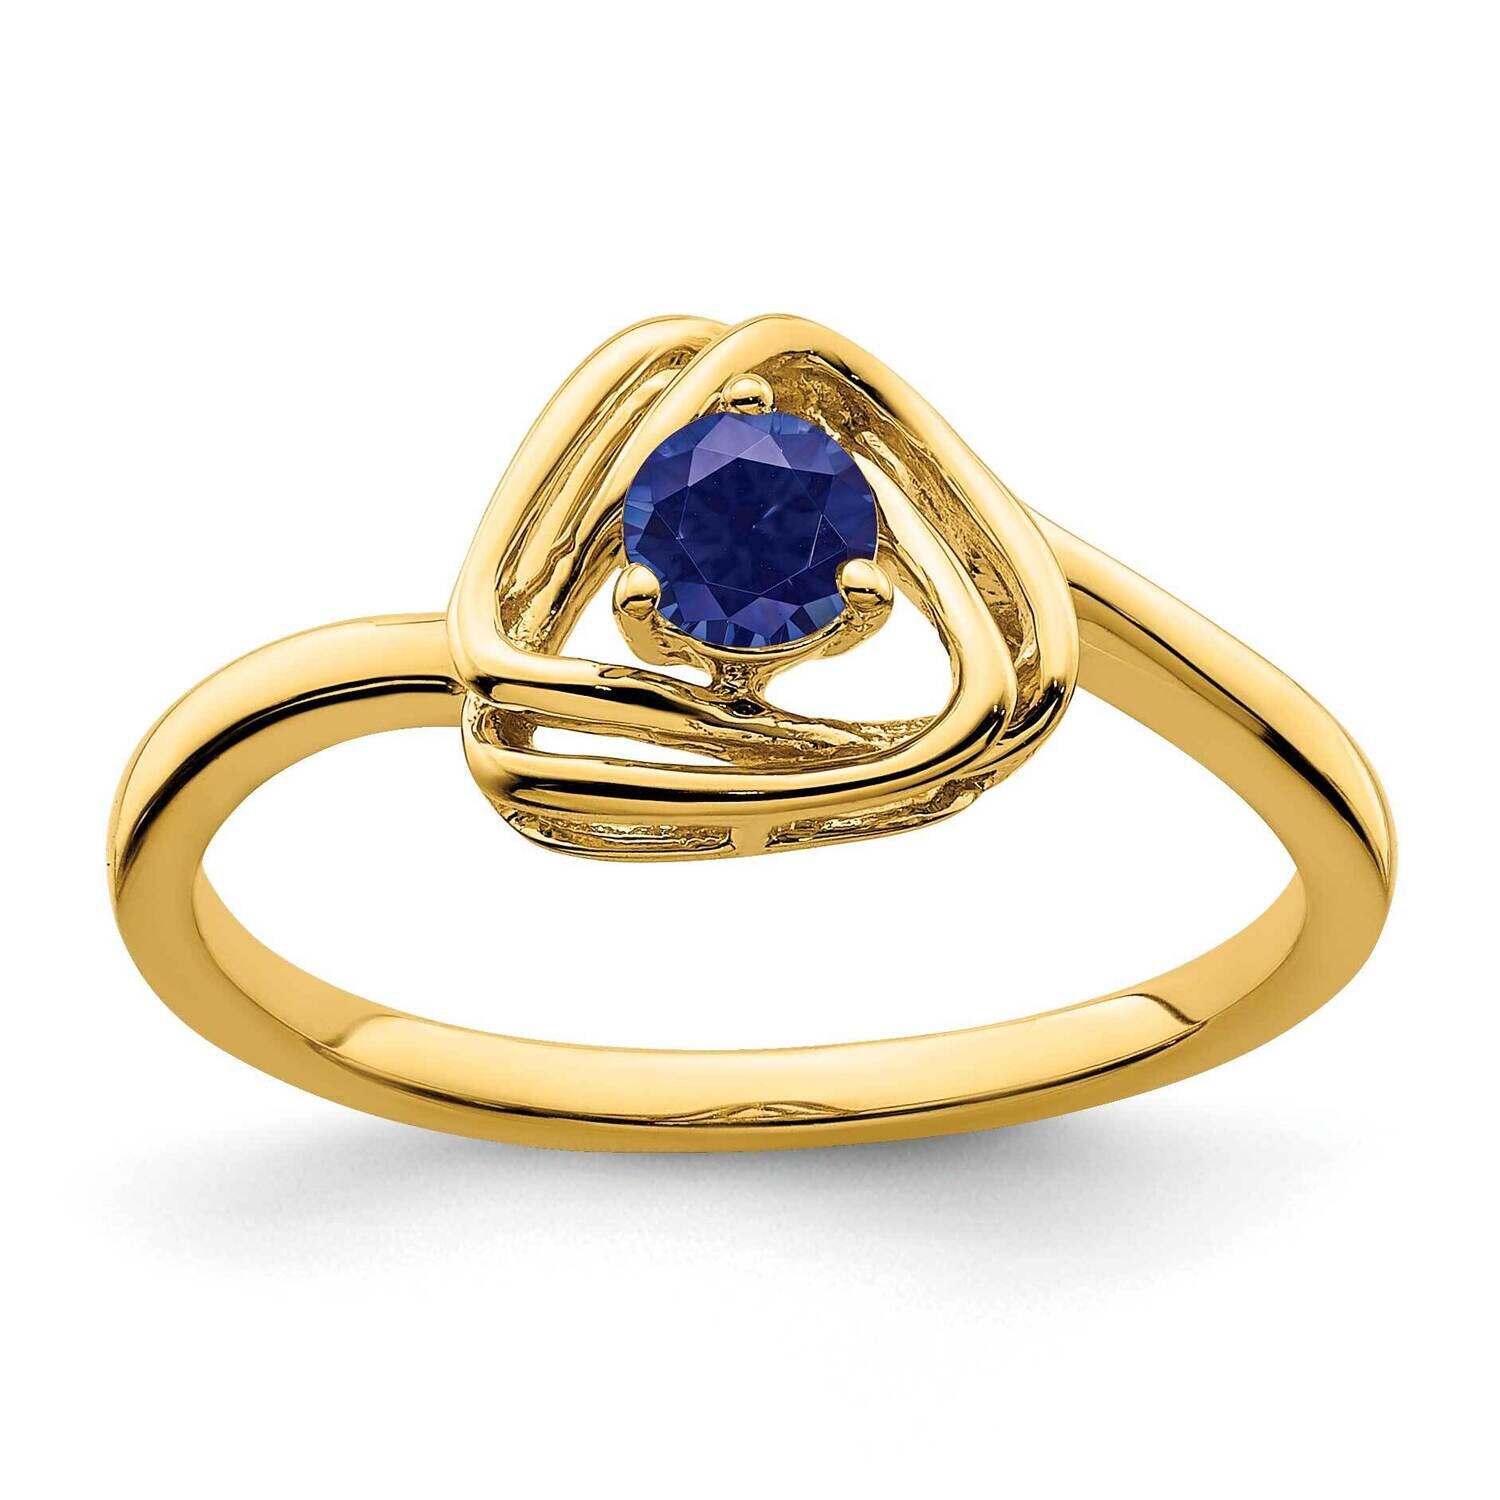 Created Sapphire Triangle Ring 14k Gold RM7395-CSA-Y